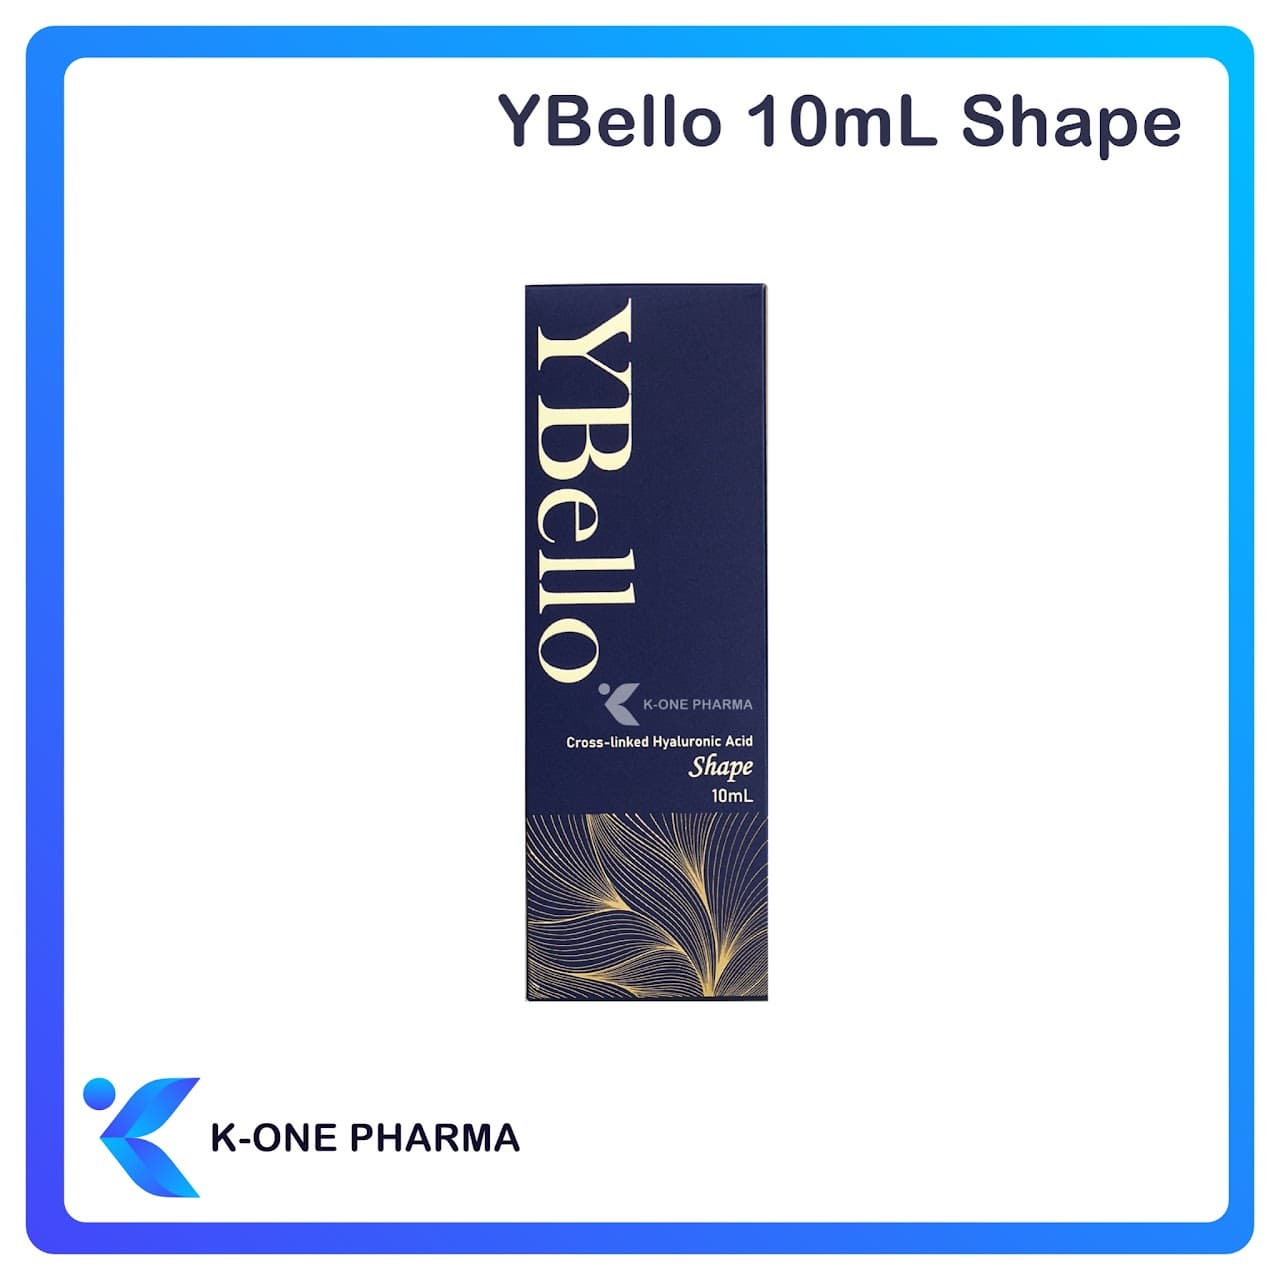 YBello 10mL Shape Fat Reduction Youthful appearance Body Shaping Contouring Smoothing Skin